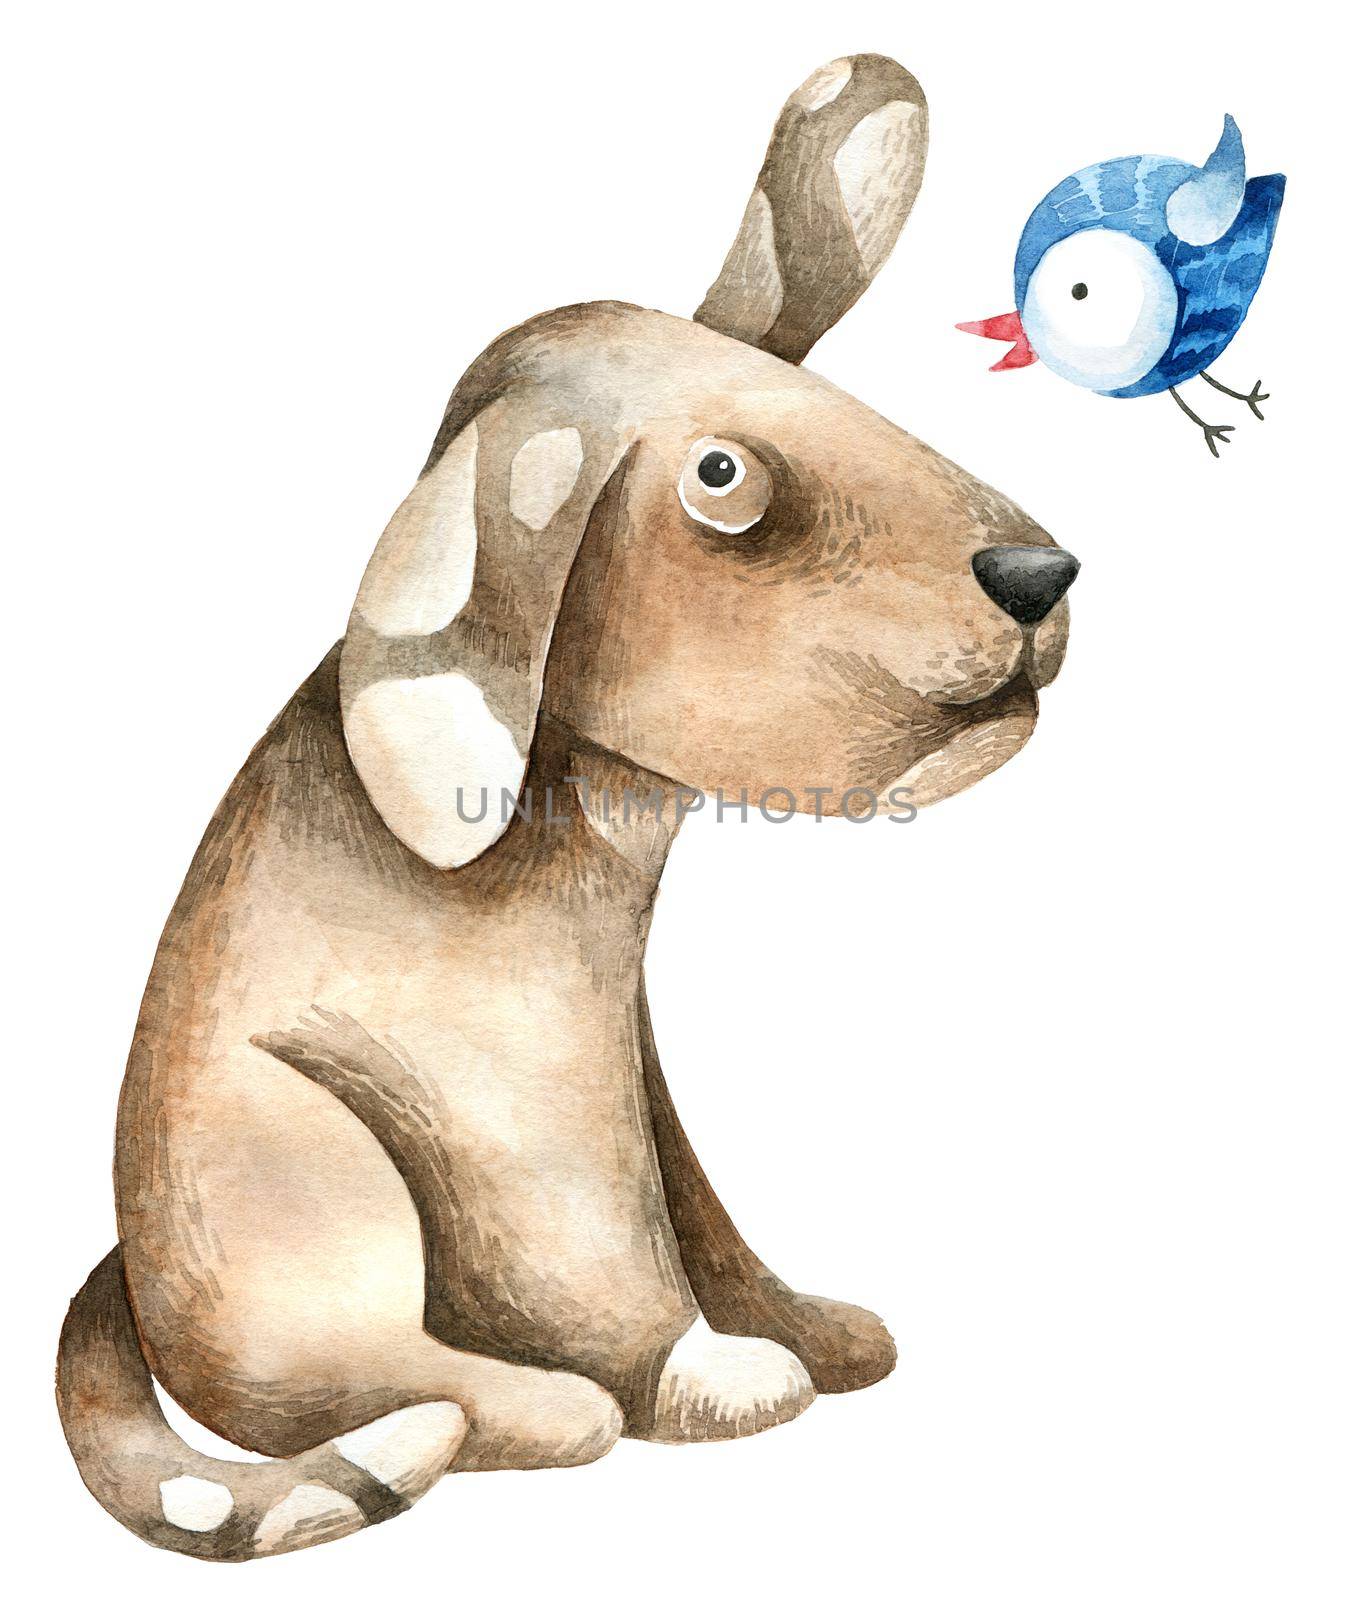 Cute illustration of dog and little blue flying bird. Design for greeting card. Drawing by watercolor.